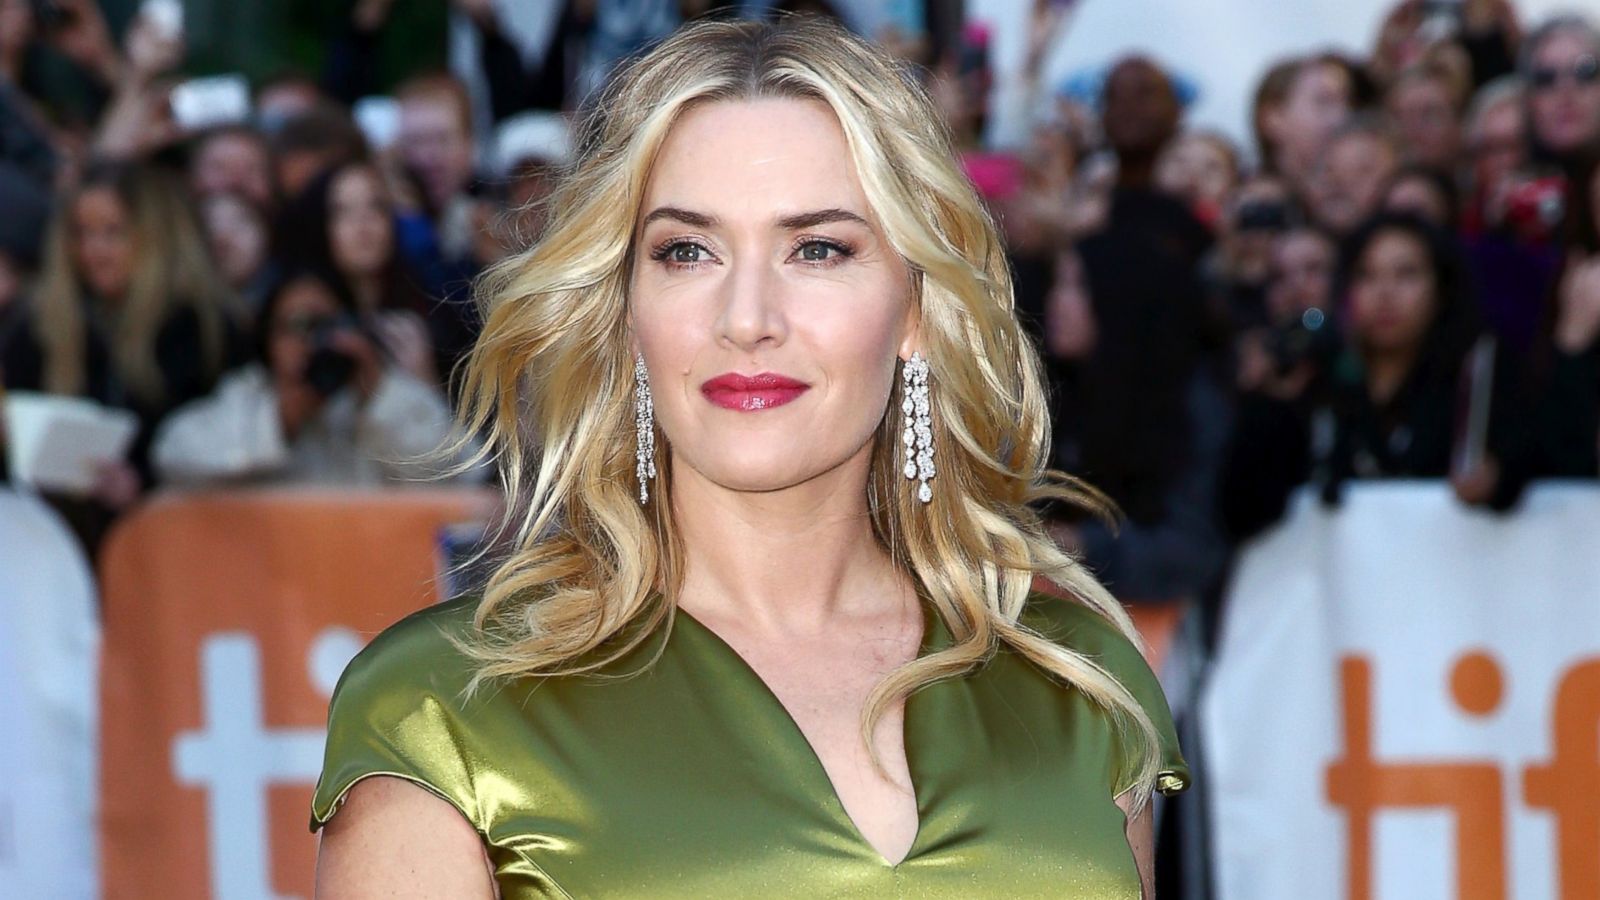 Kate Winslet on Her Body: 'I Really Love the Fact That I'm News